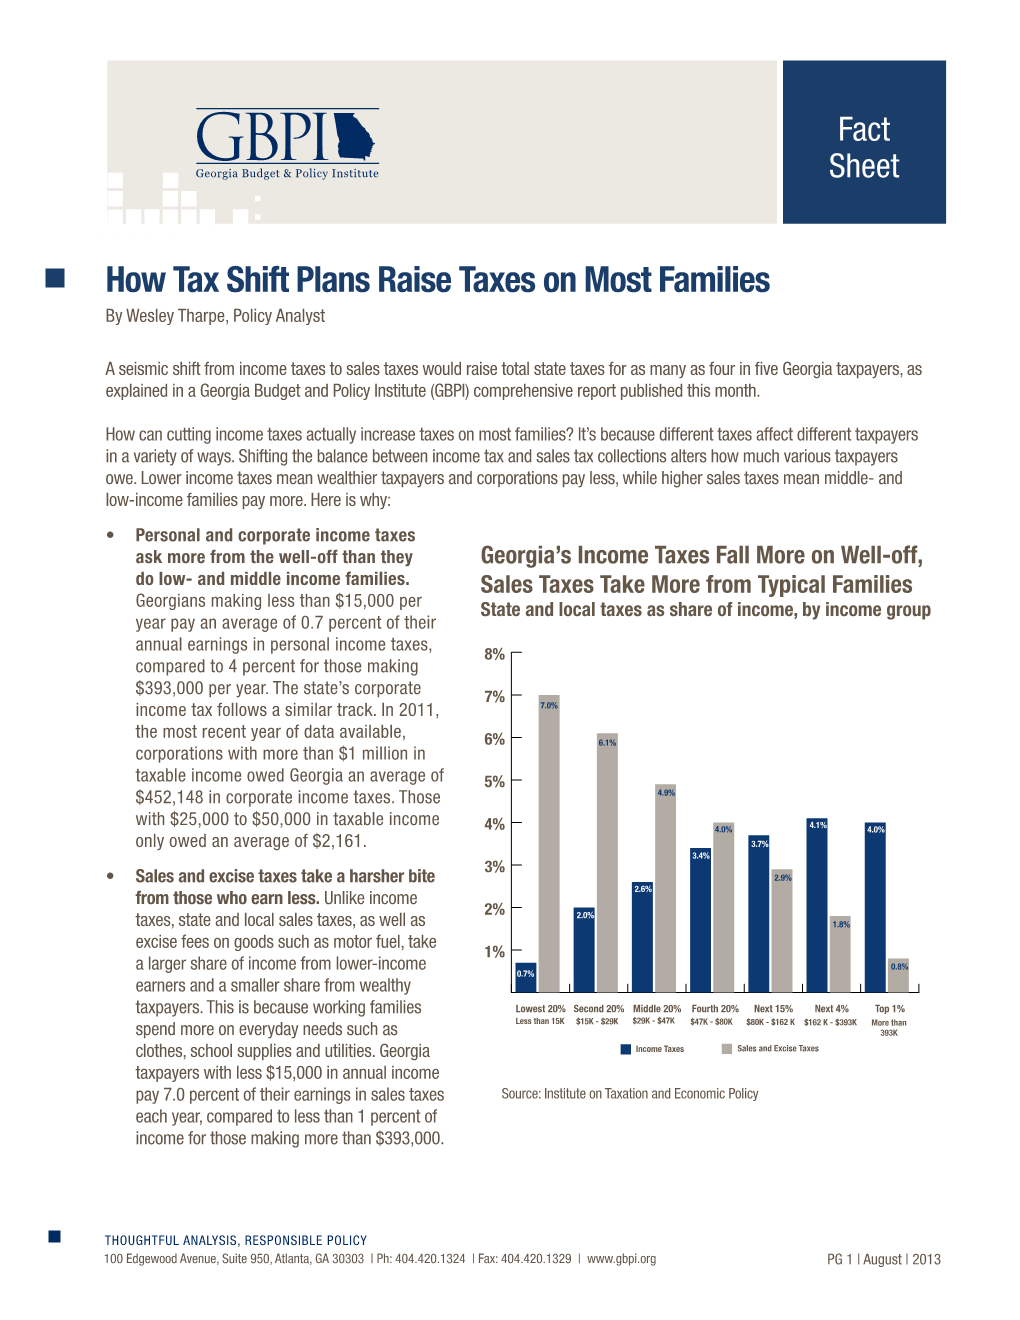 How Tax Shift Plans Raise Taxes on Most Families by Wesley Tharpe, Policy Analyst